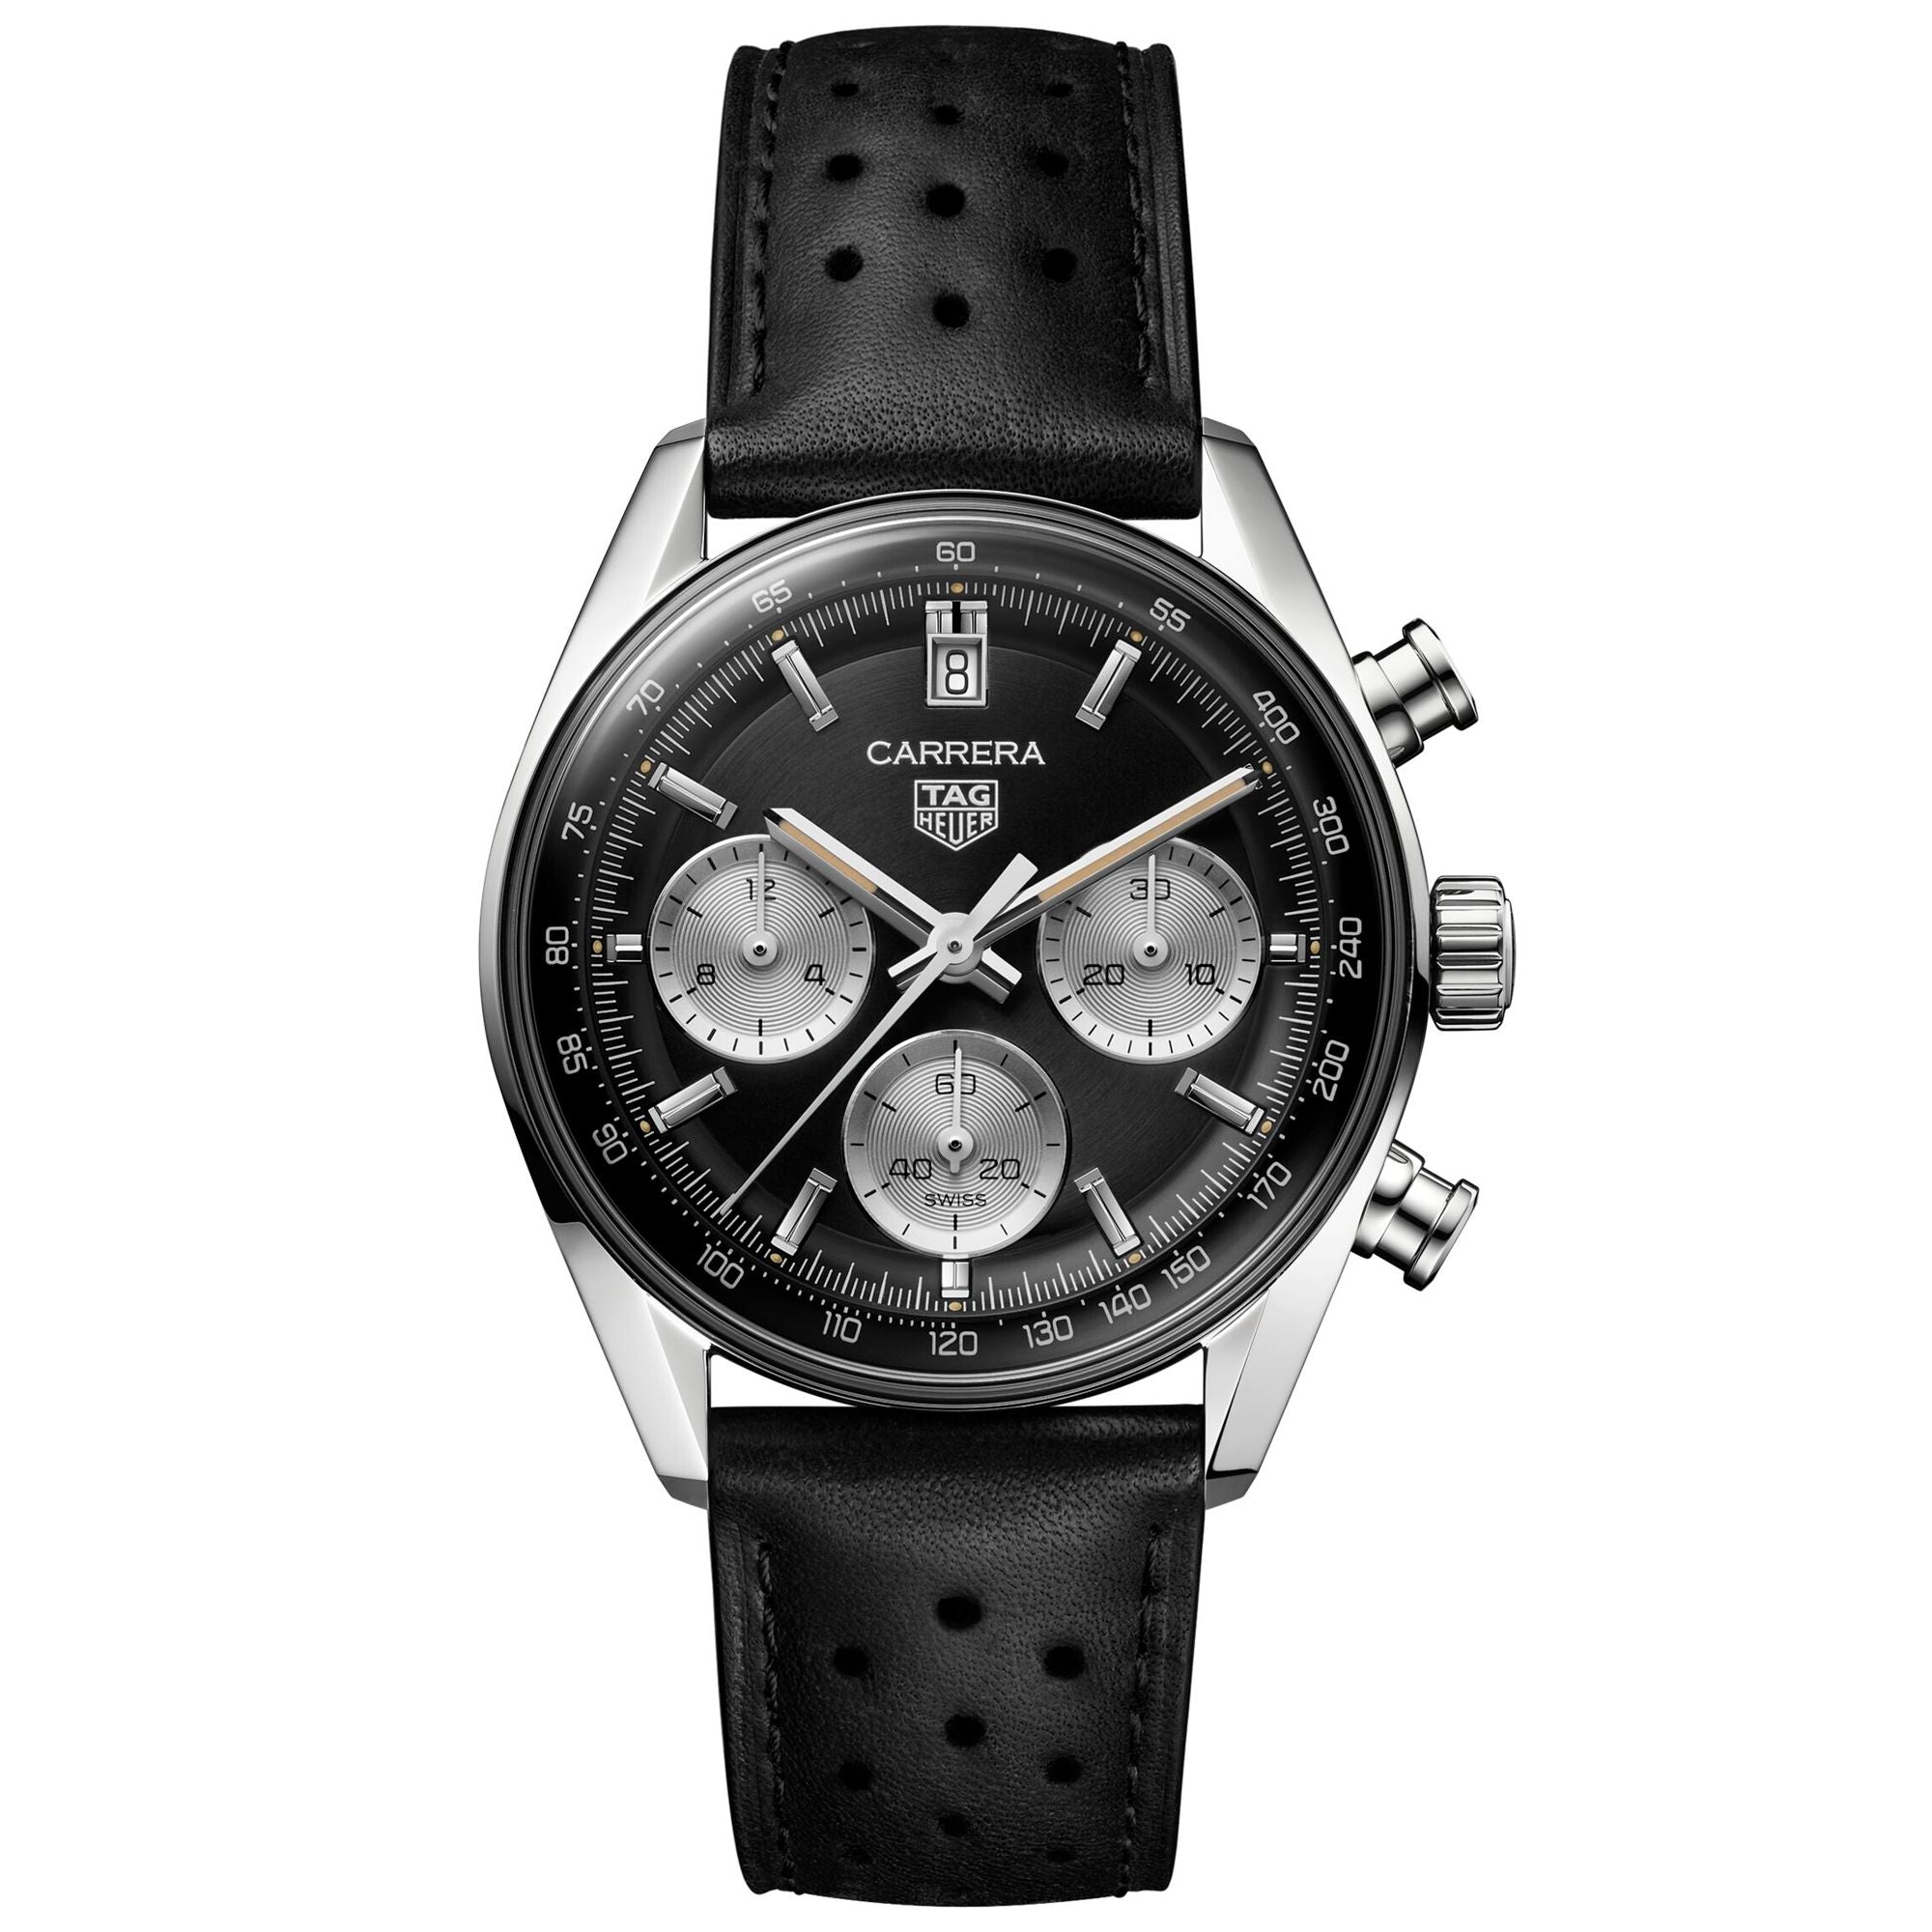 TAG HEUER CARRERA Automatic Chronograph Black Dial Black Leather Strap - CBS2210.FC6534